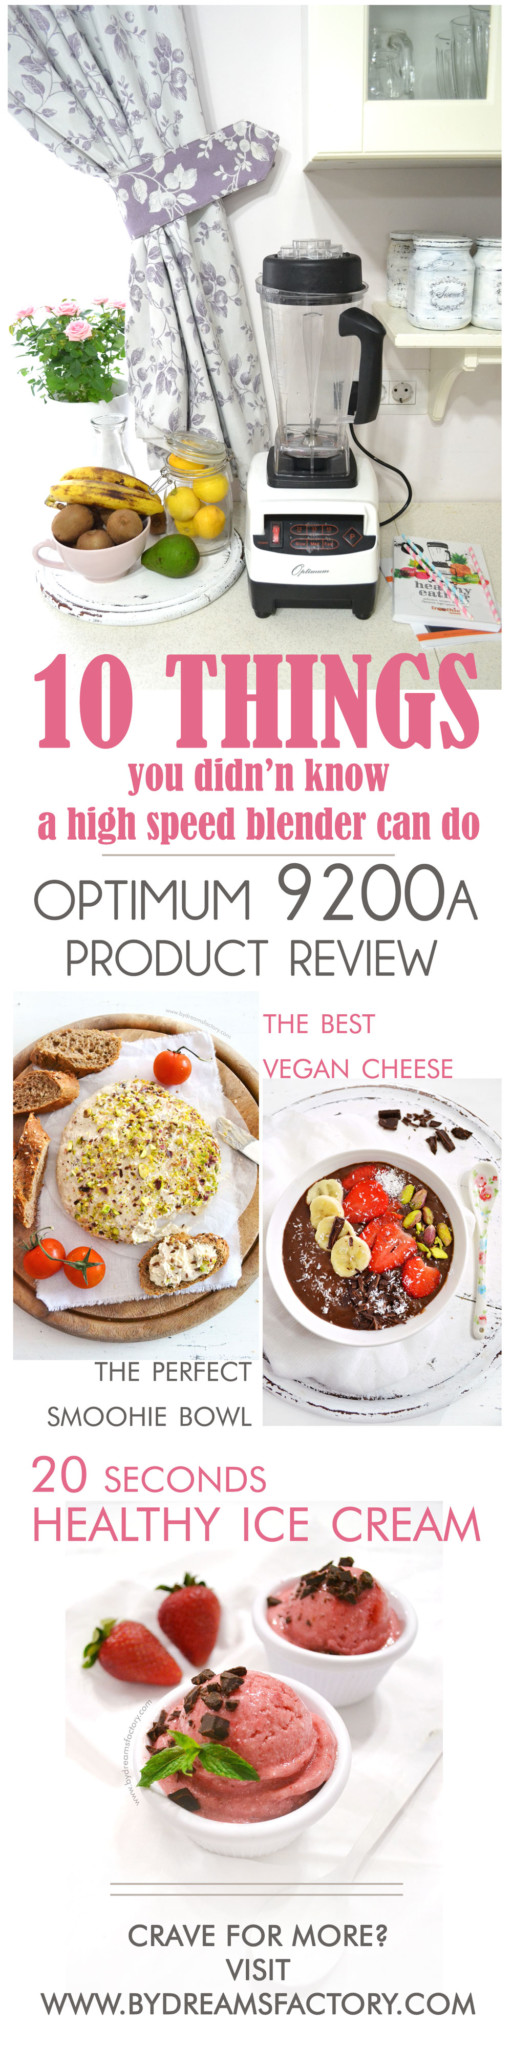 10 things you didn't know a high speed blender can do - Optimum 9200A review